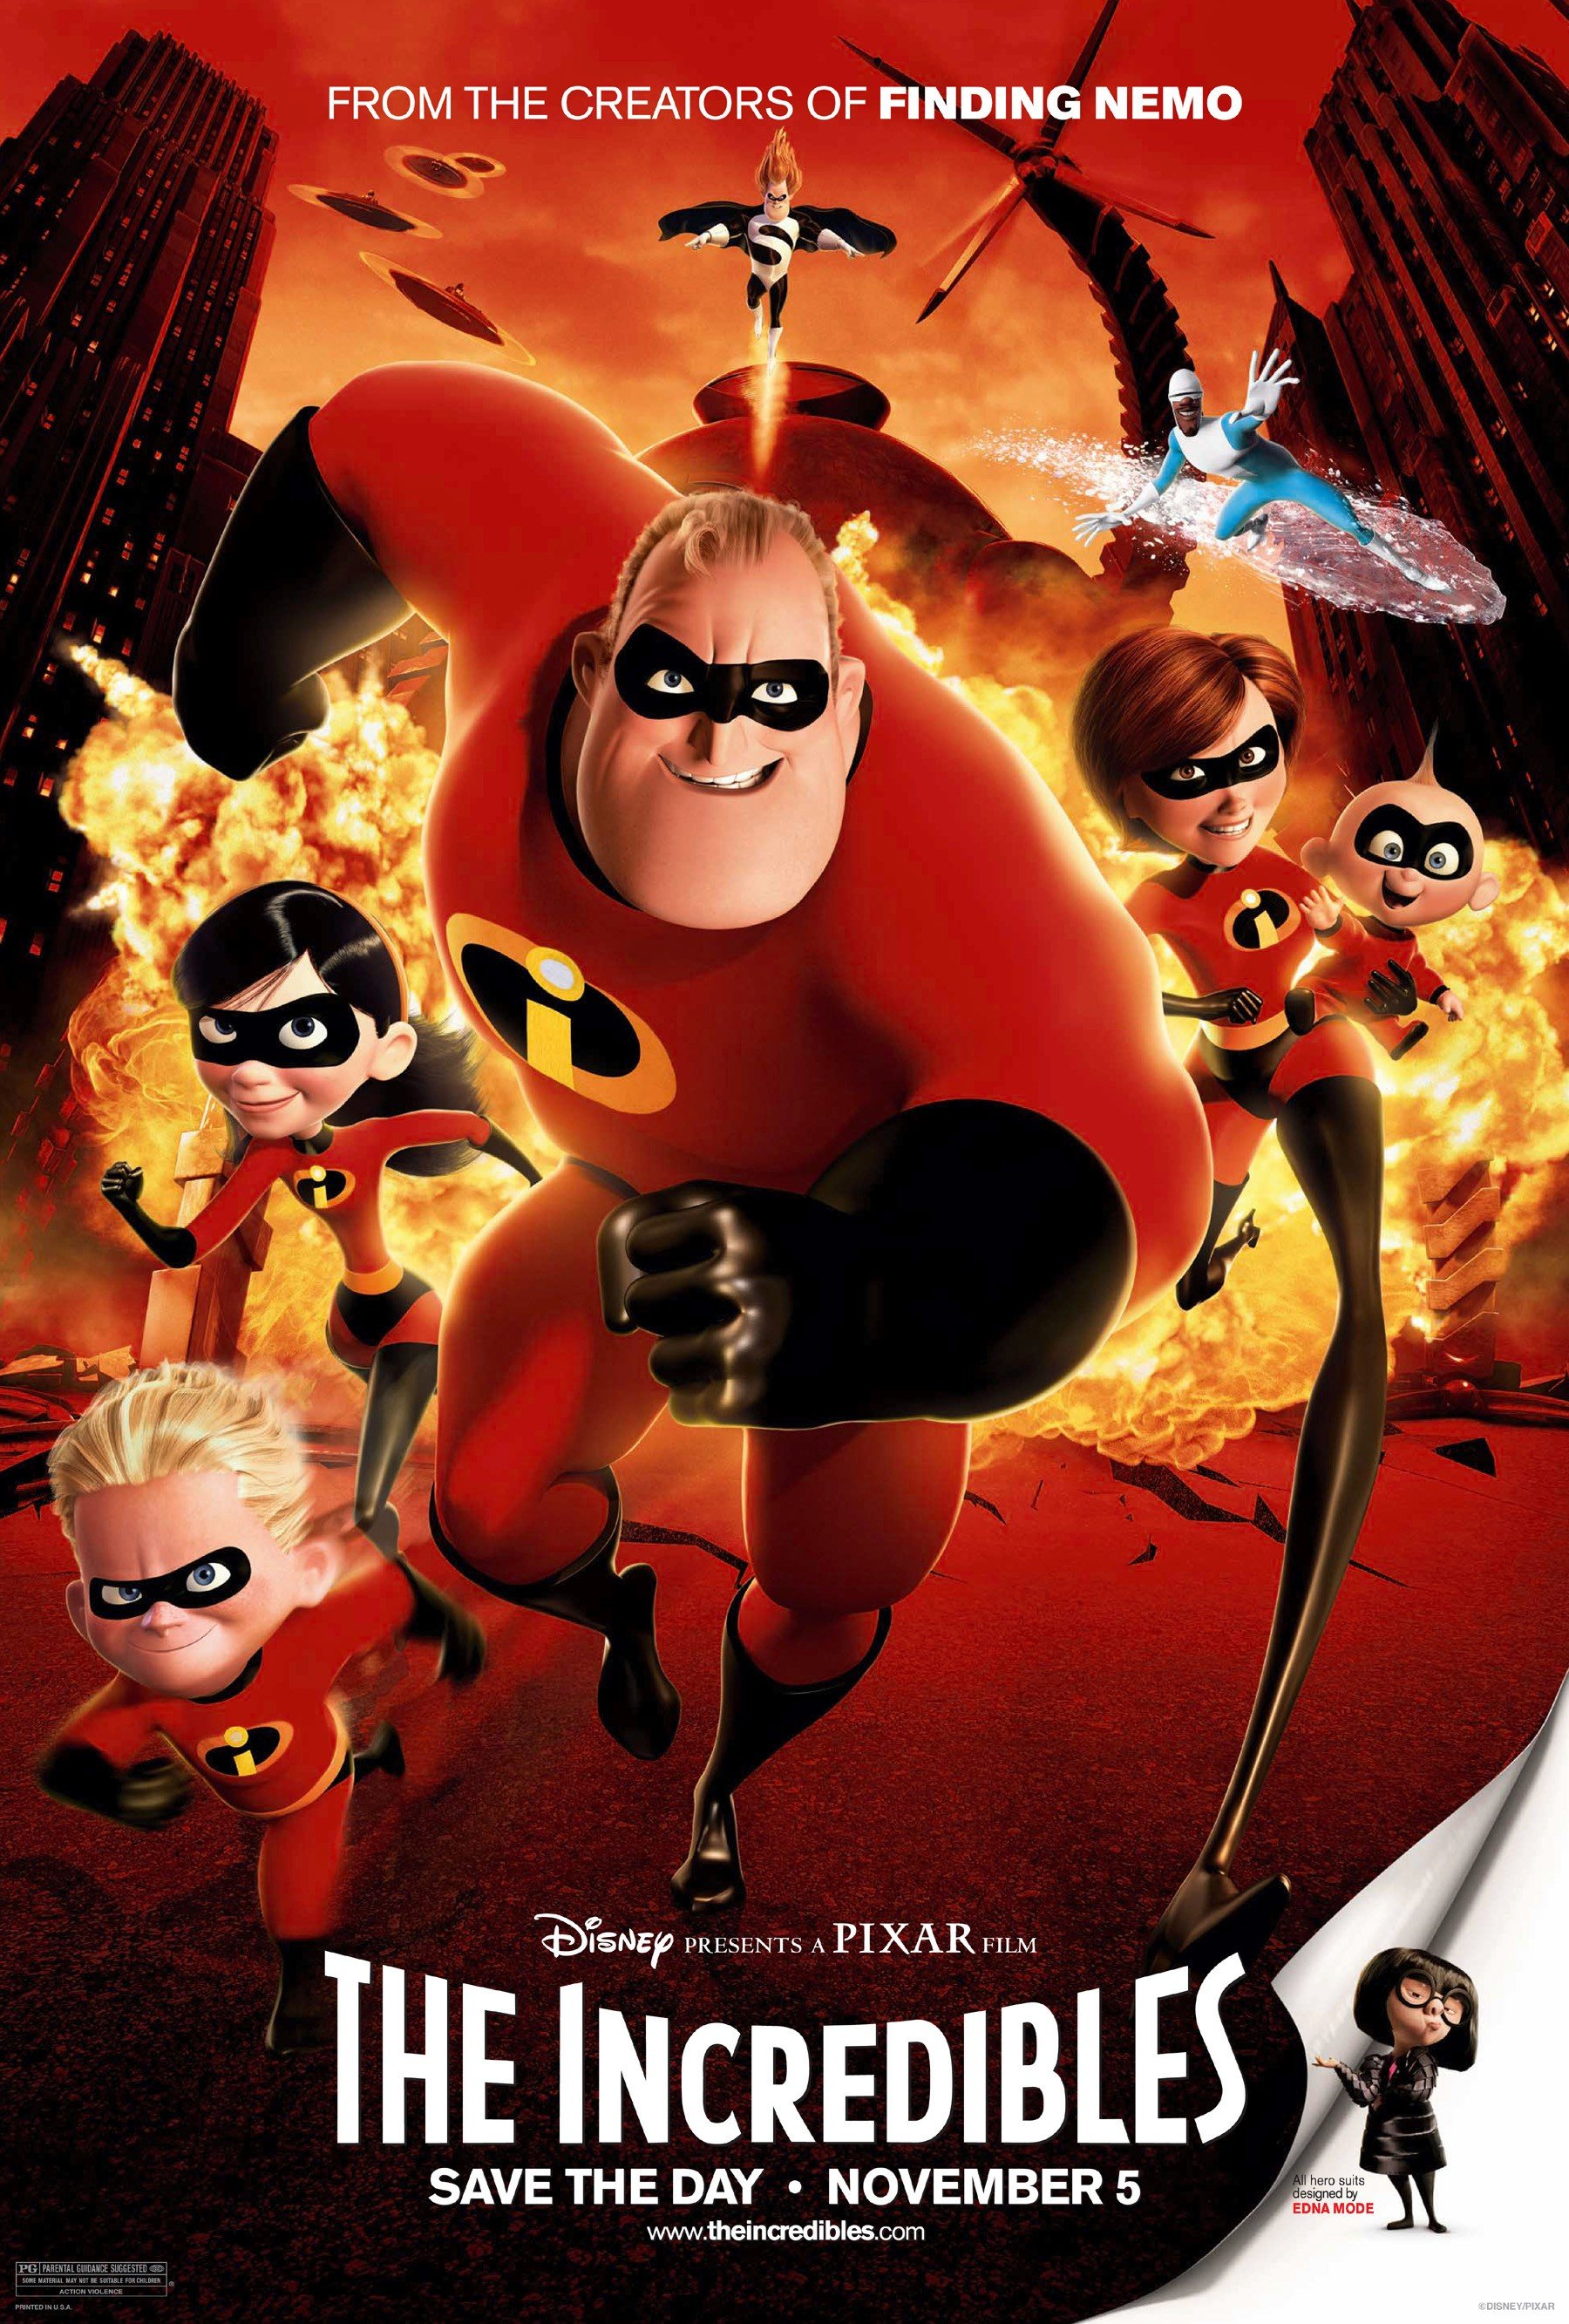 Best Christmas animated movies - The Incredibles